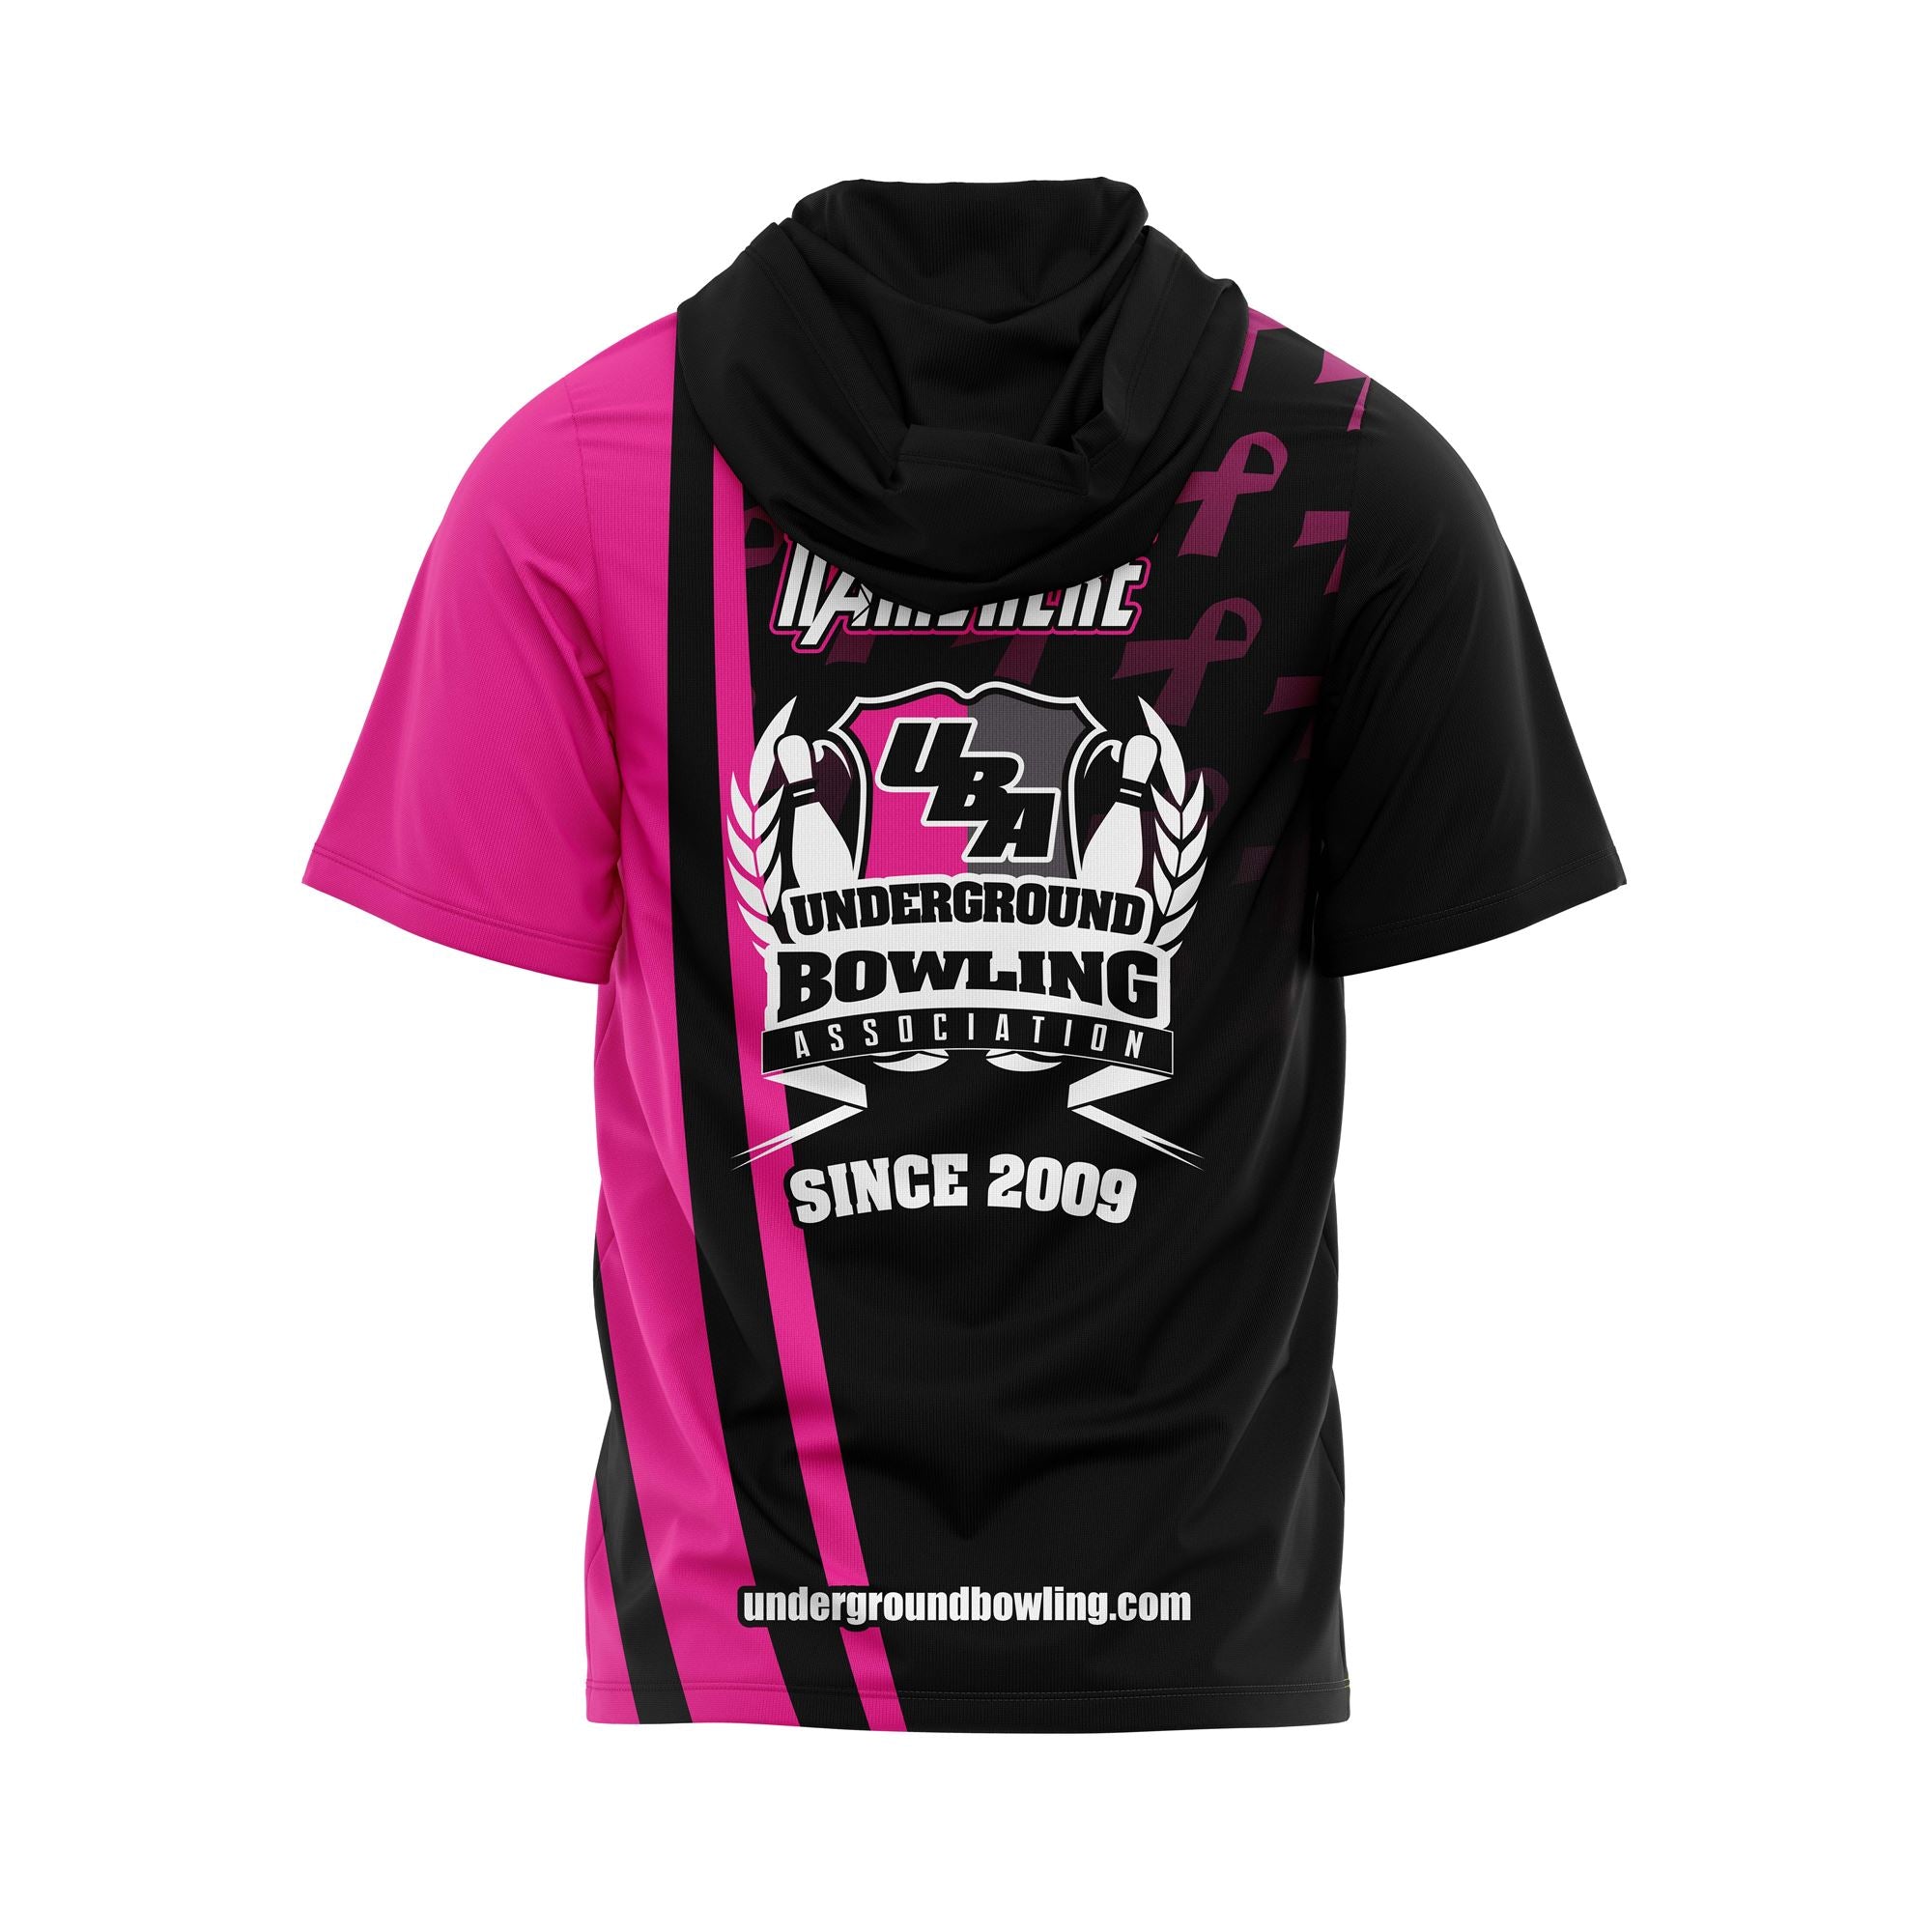 Dirty South Breast Cancer Jersey